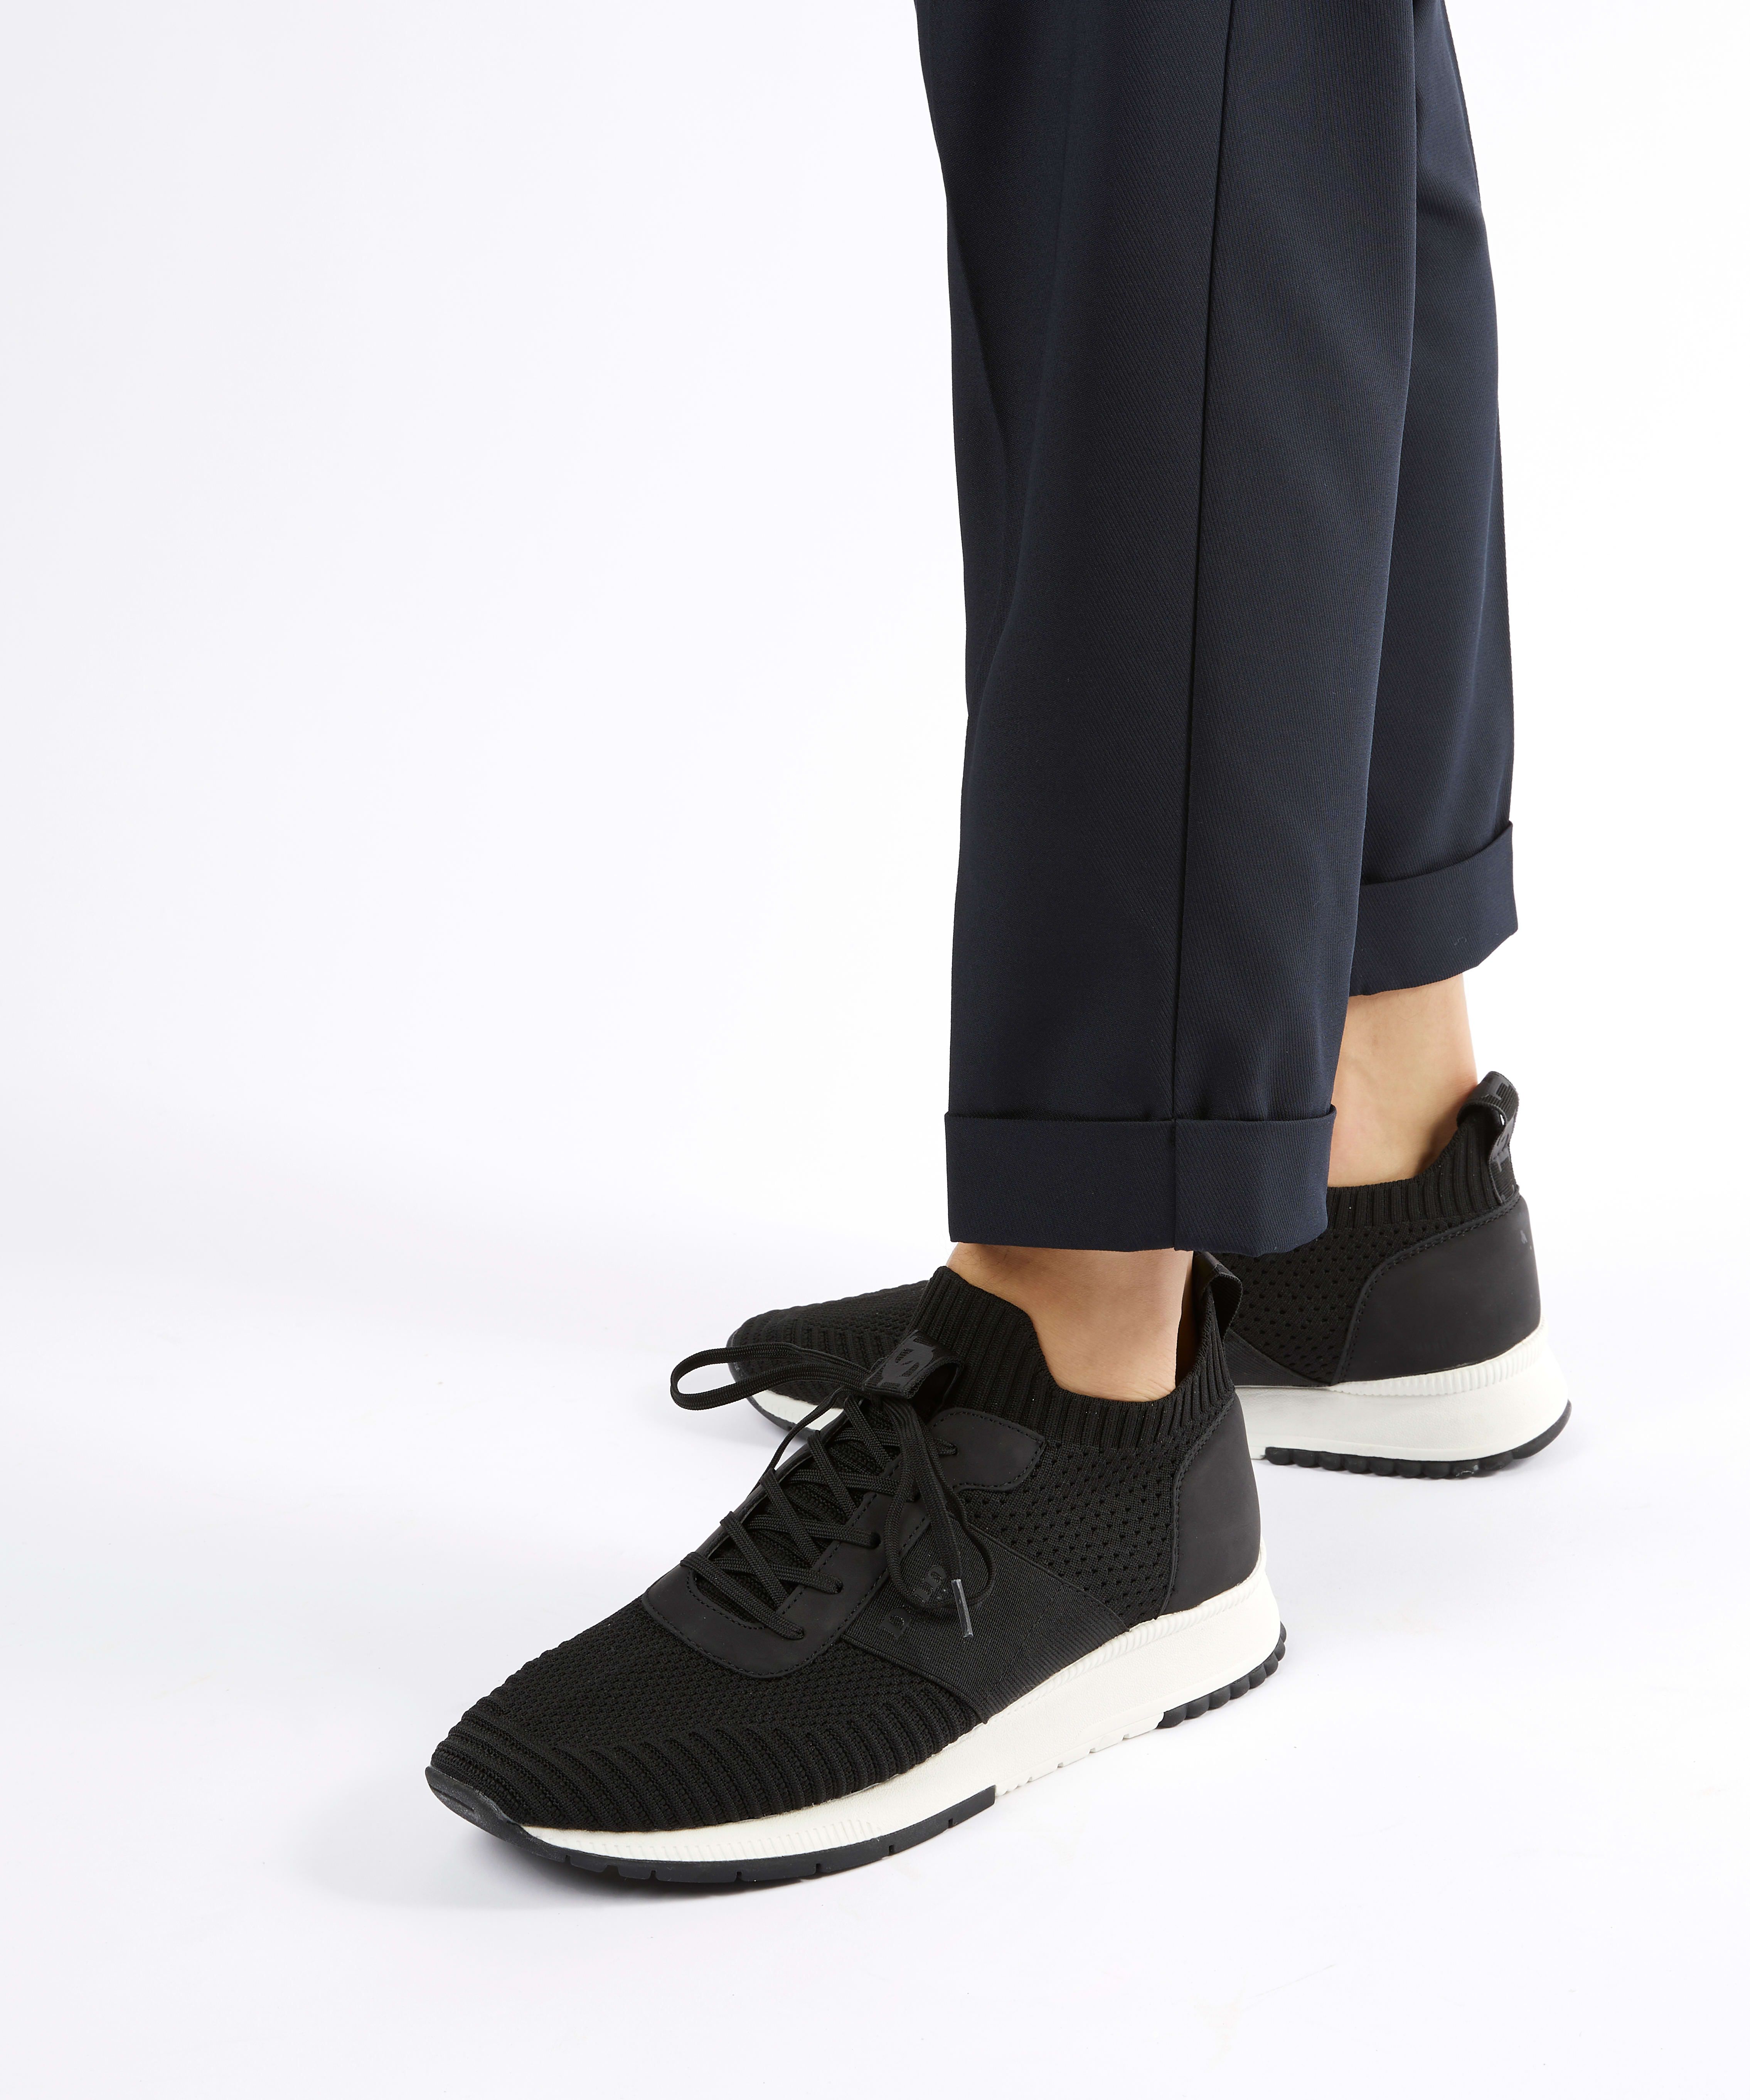 These trainers combine on-trend knitted detailing with a sporty profile. This breathable, lightweight style is available in an array of neutral colourways and features a wedge sole.